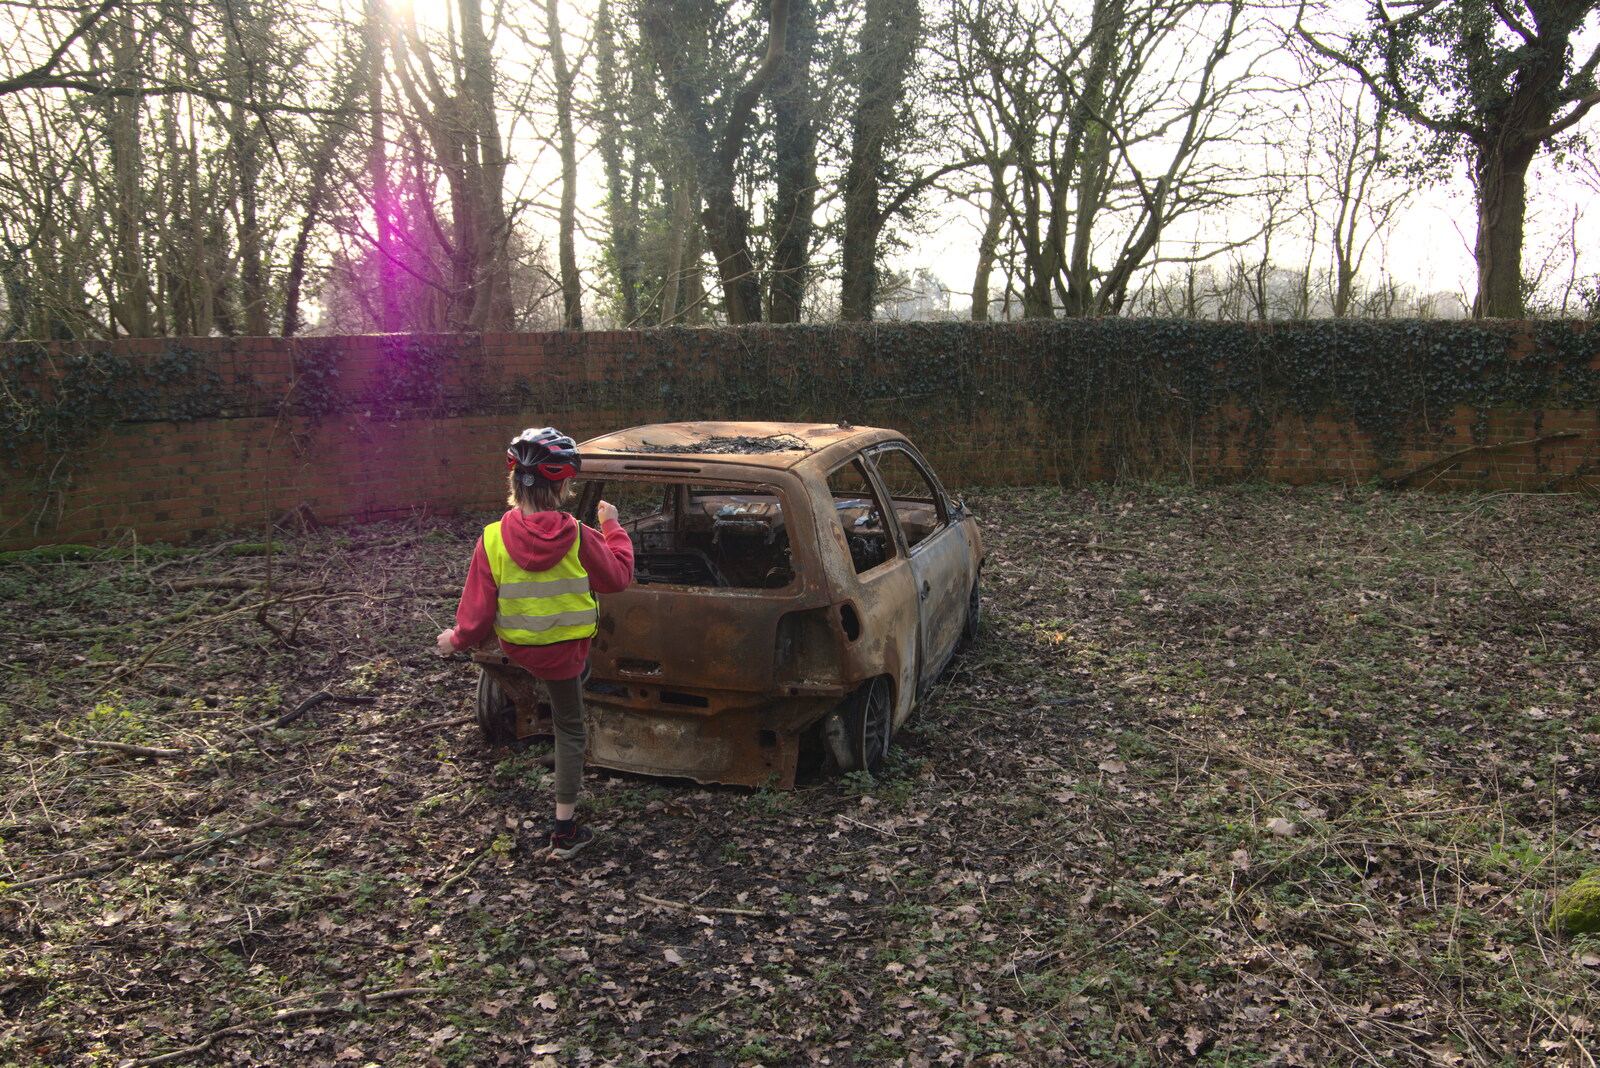 Harry kicks the burned-out car from Fred's New Bike and an A140 Closure, Brome, Suffolk - 27th February 2021